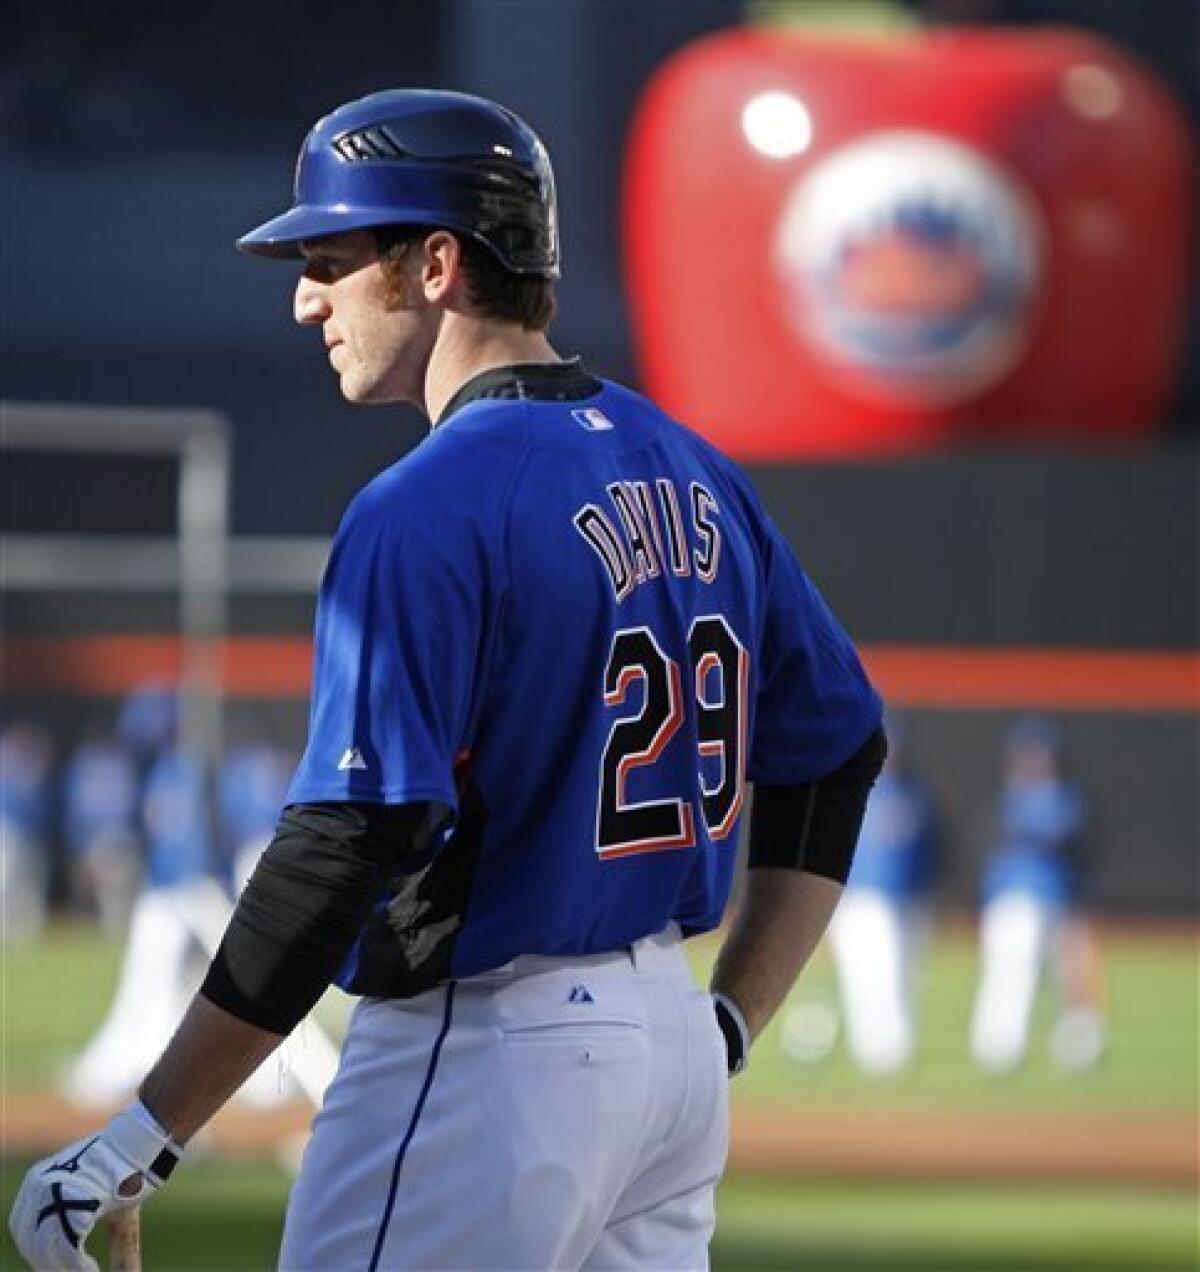 Mets bring Ike Davis up to major leagues - The San Diego Union-Tribune